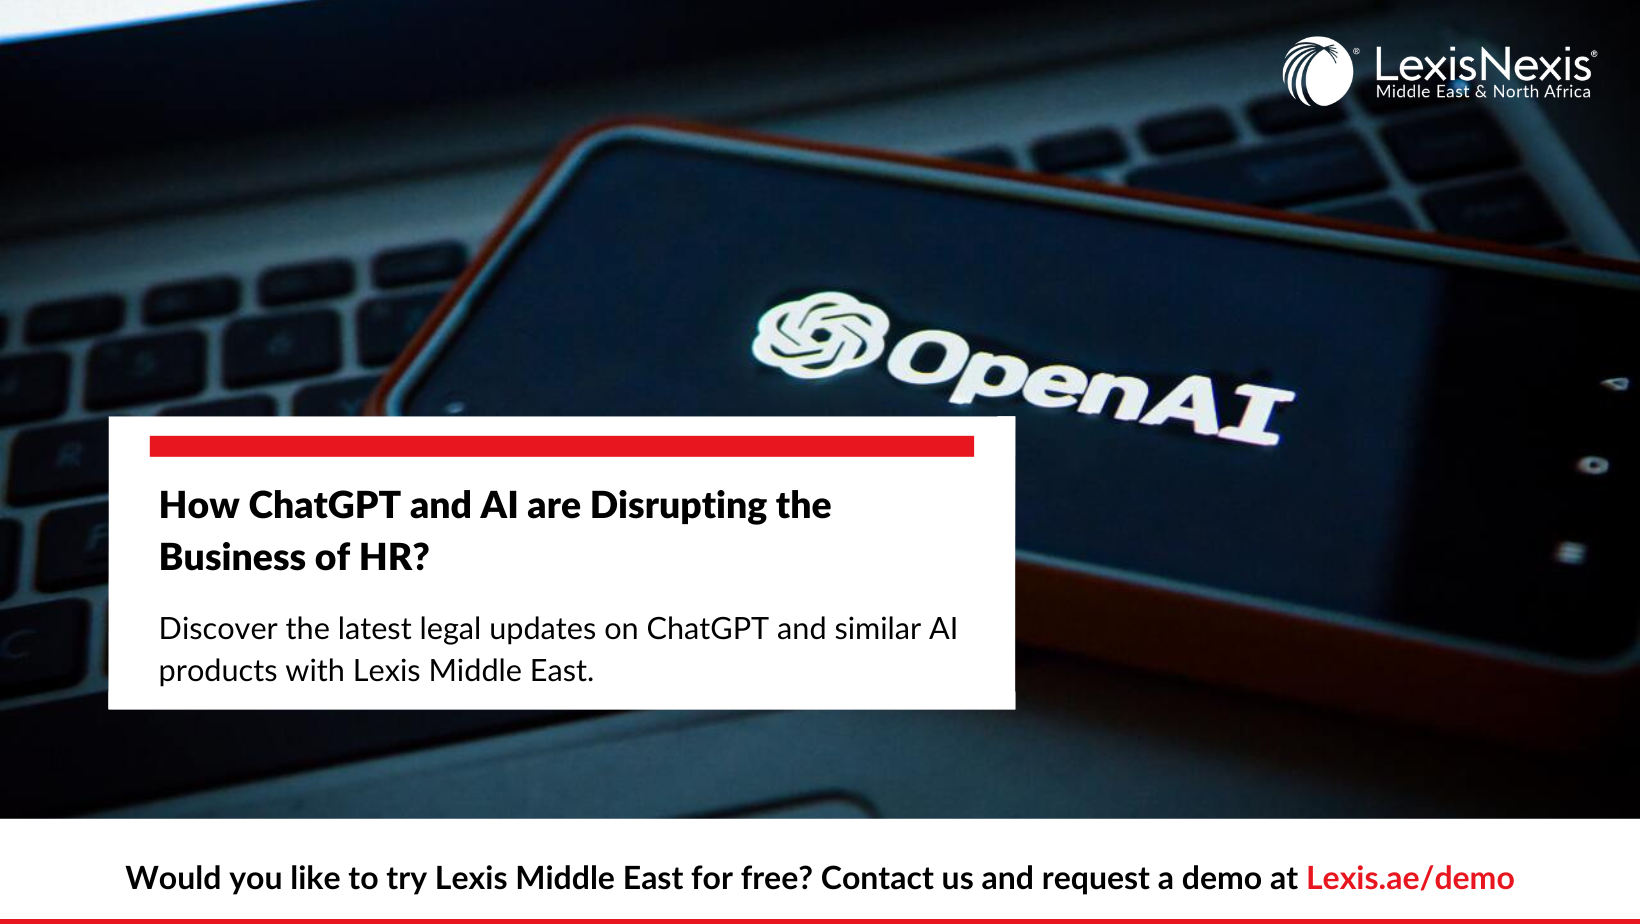 LexisNexis | How ChatGPT and AI are Disrupting the Business of HR | Article